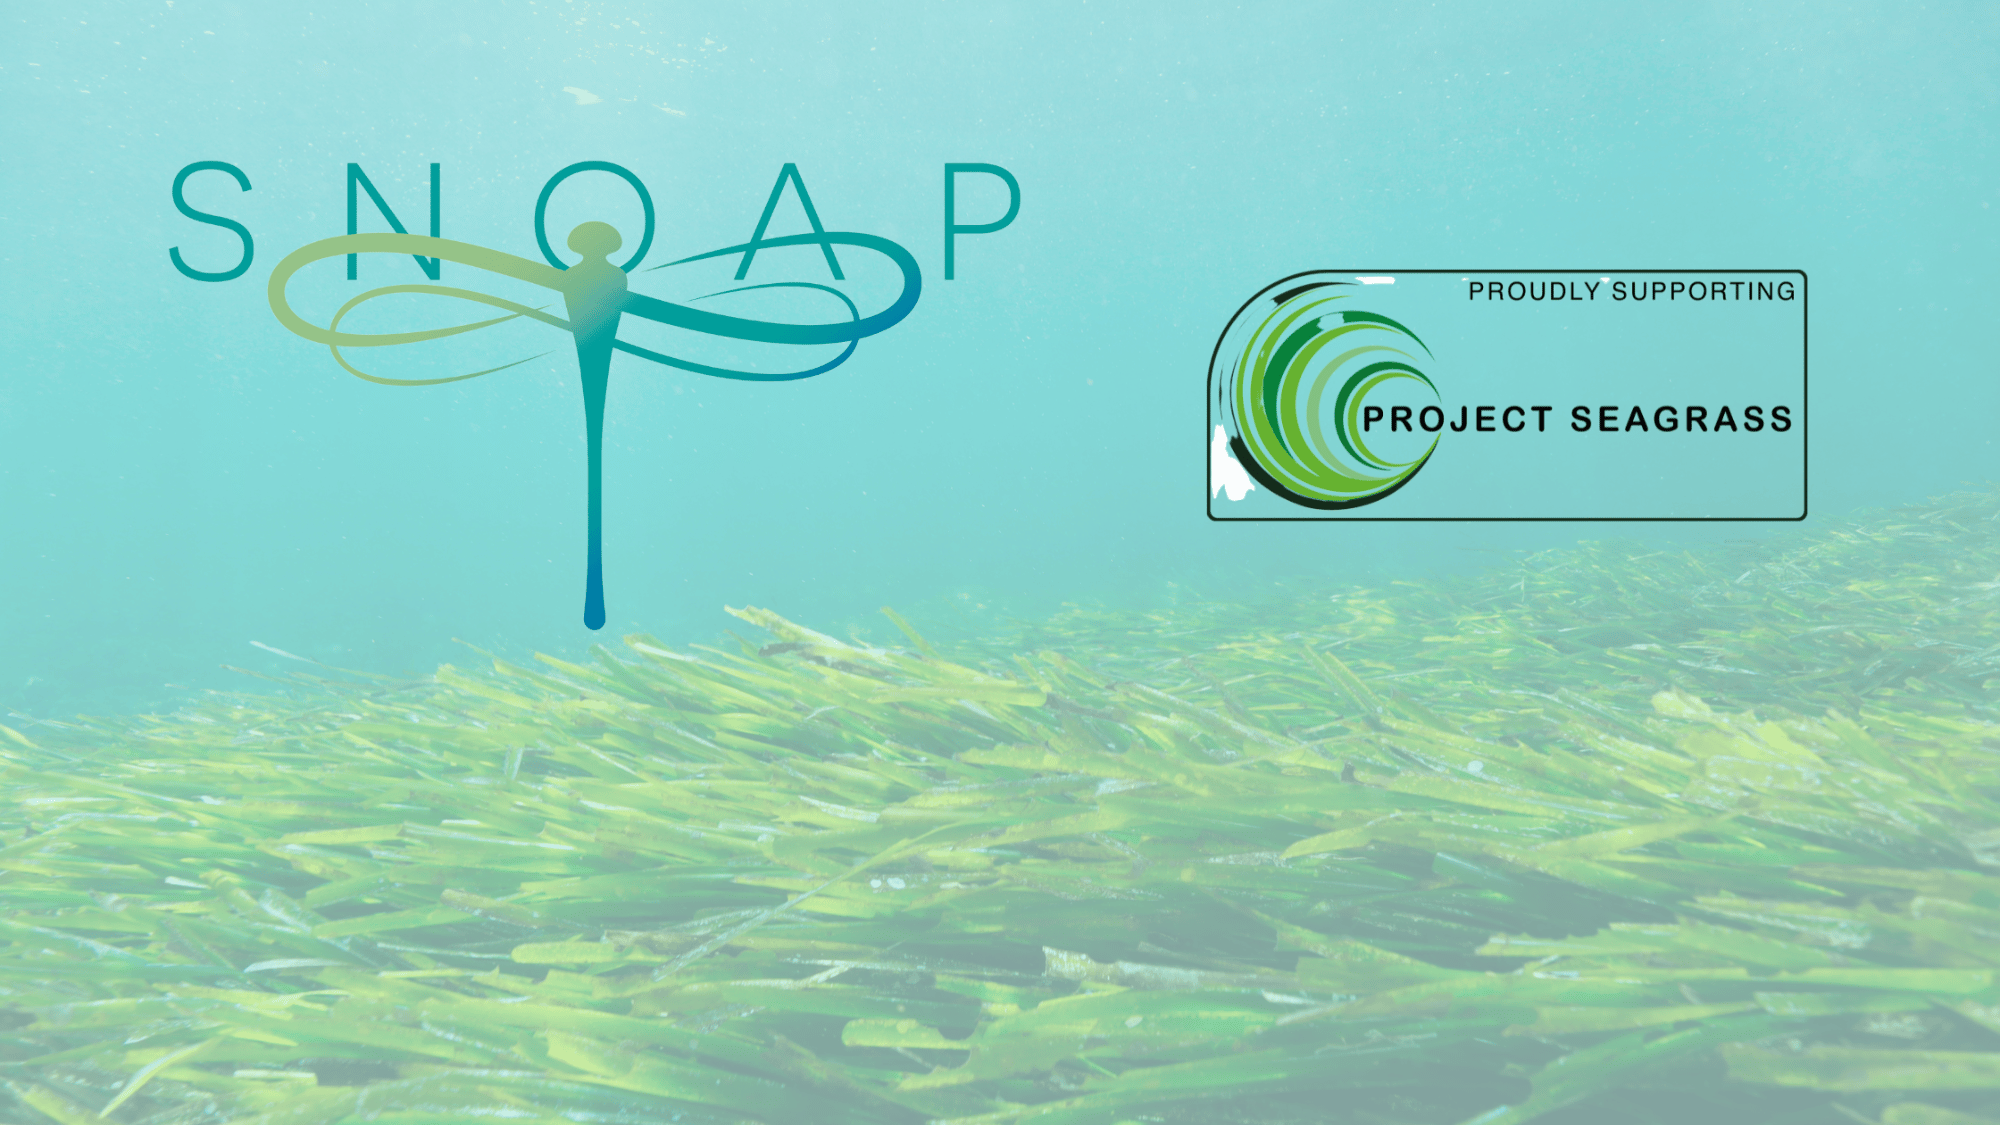 SNOAP Supports Project Seagrass